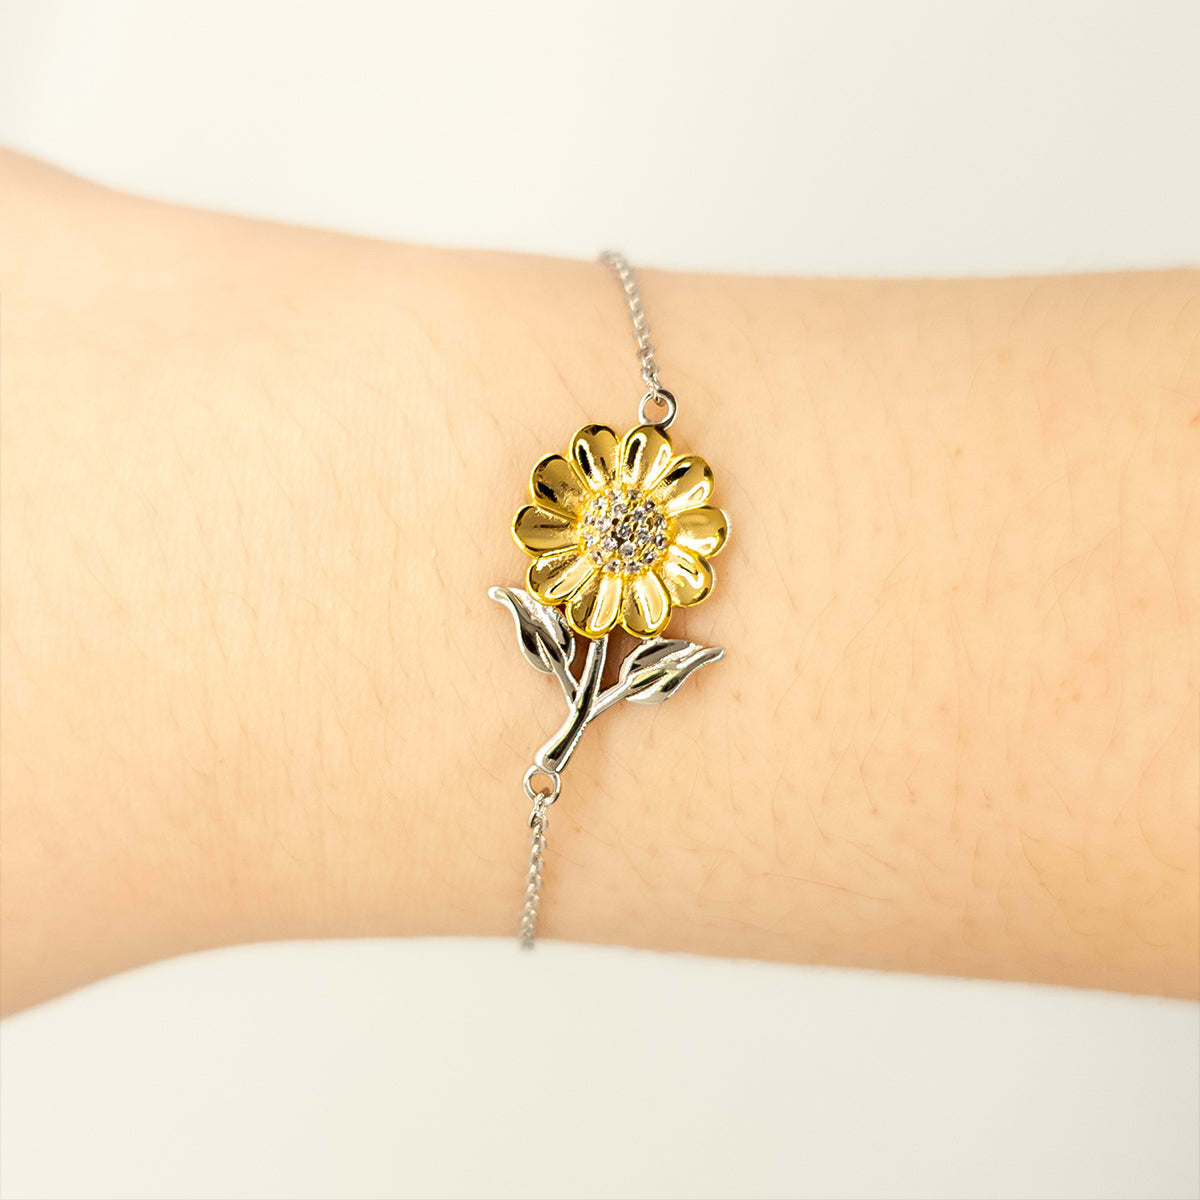 Grandpa Sunflower Bracelet - Always in My Heart, Unique Gift for Veterans Day, Inspirational Jewelry for Grandpa, Birthday Present with Confidence and Hope